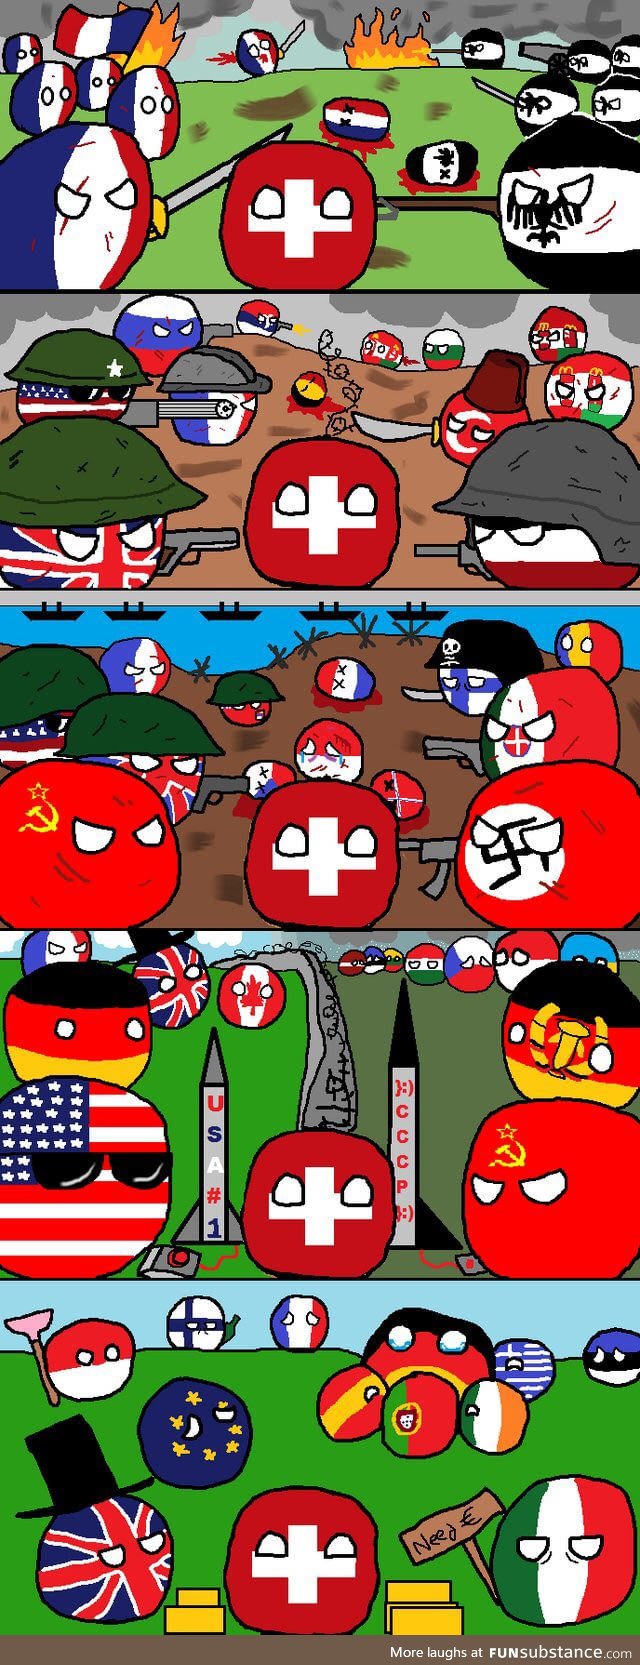 Switserland: Ain't play with yall